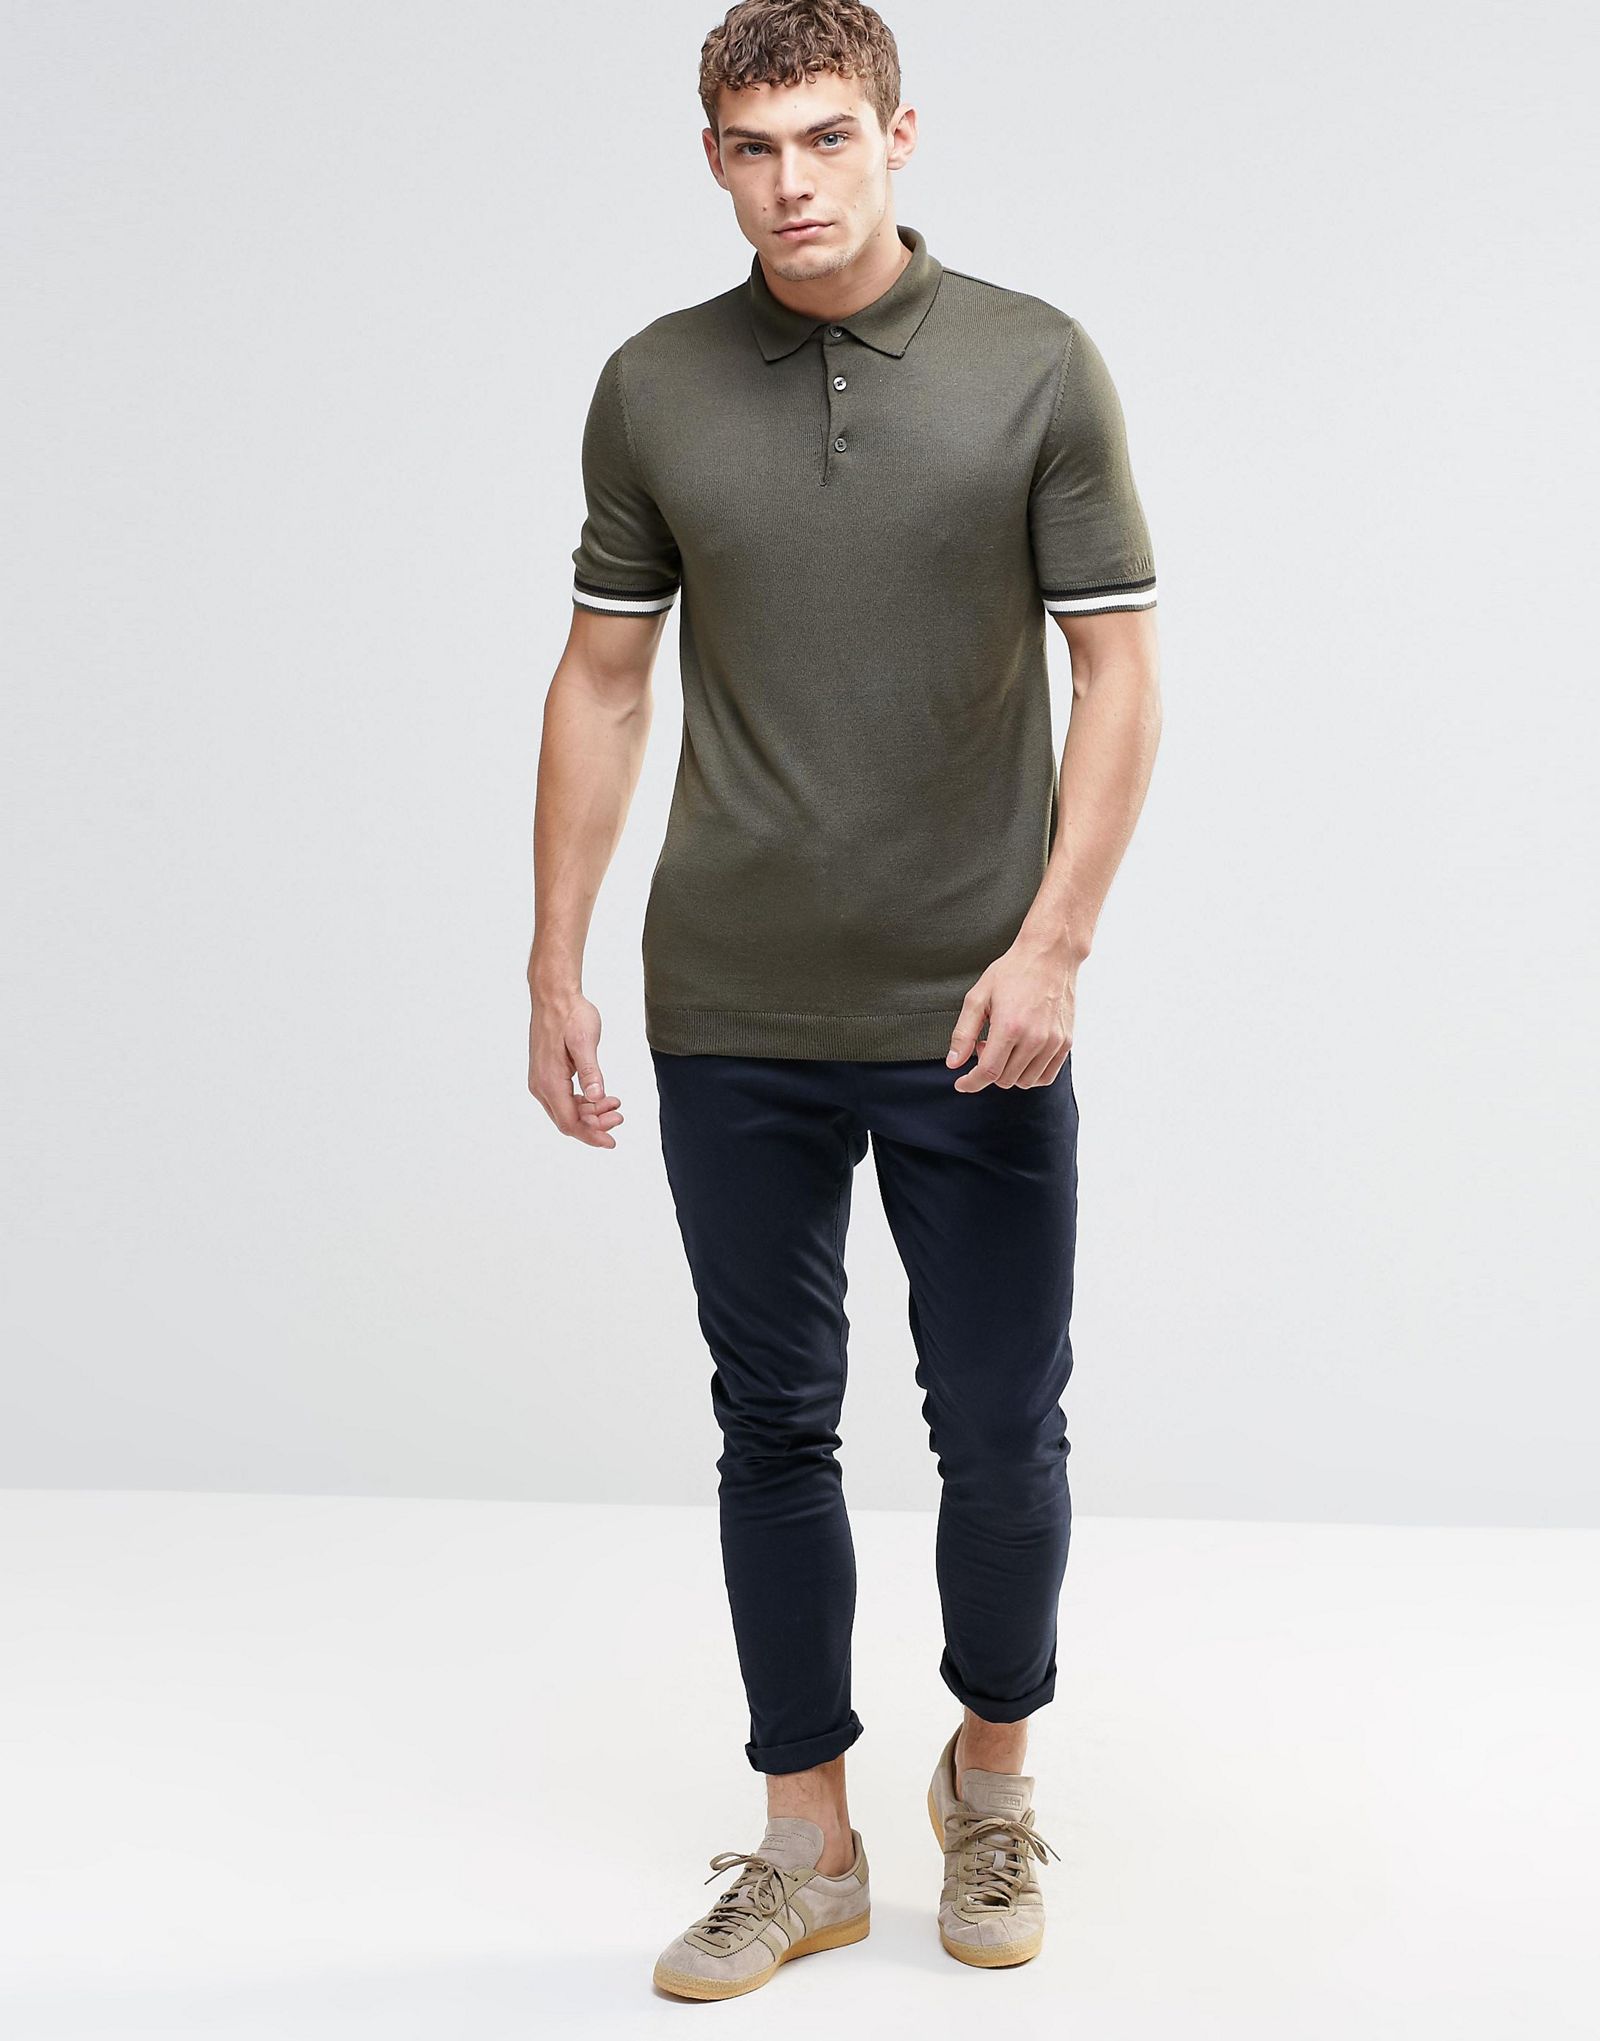 River Island Polo Shirt With Contrast Sleeves In Khaki